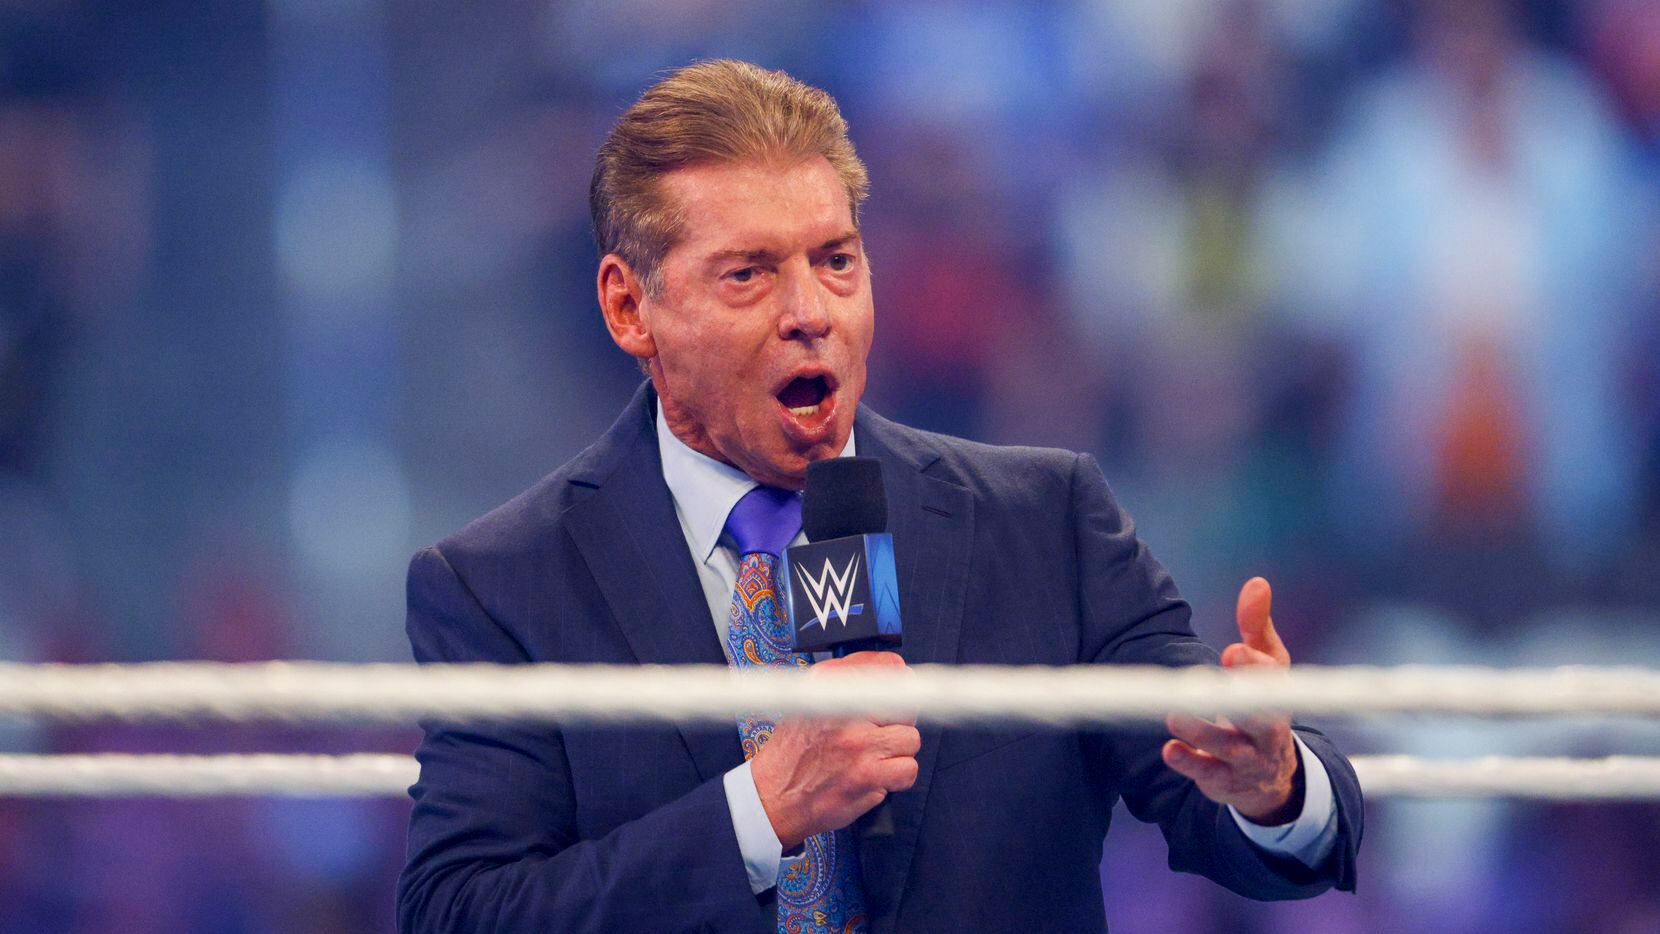 Vince McMahon speaks during a match at WrestleMania Sunday at AT&T Stadium in Arlington,...